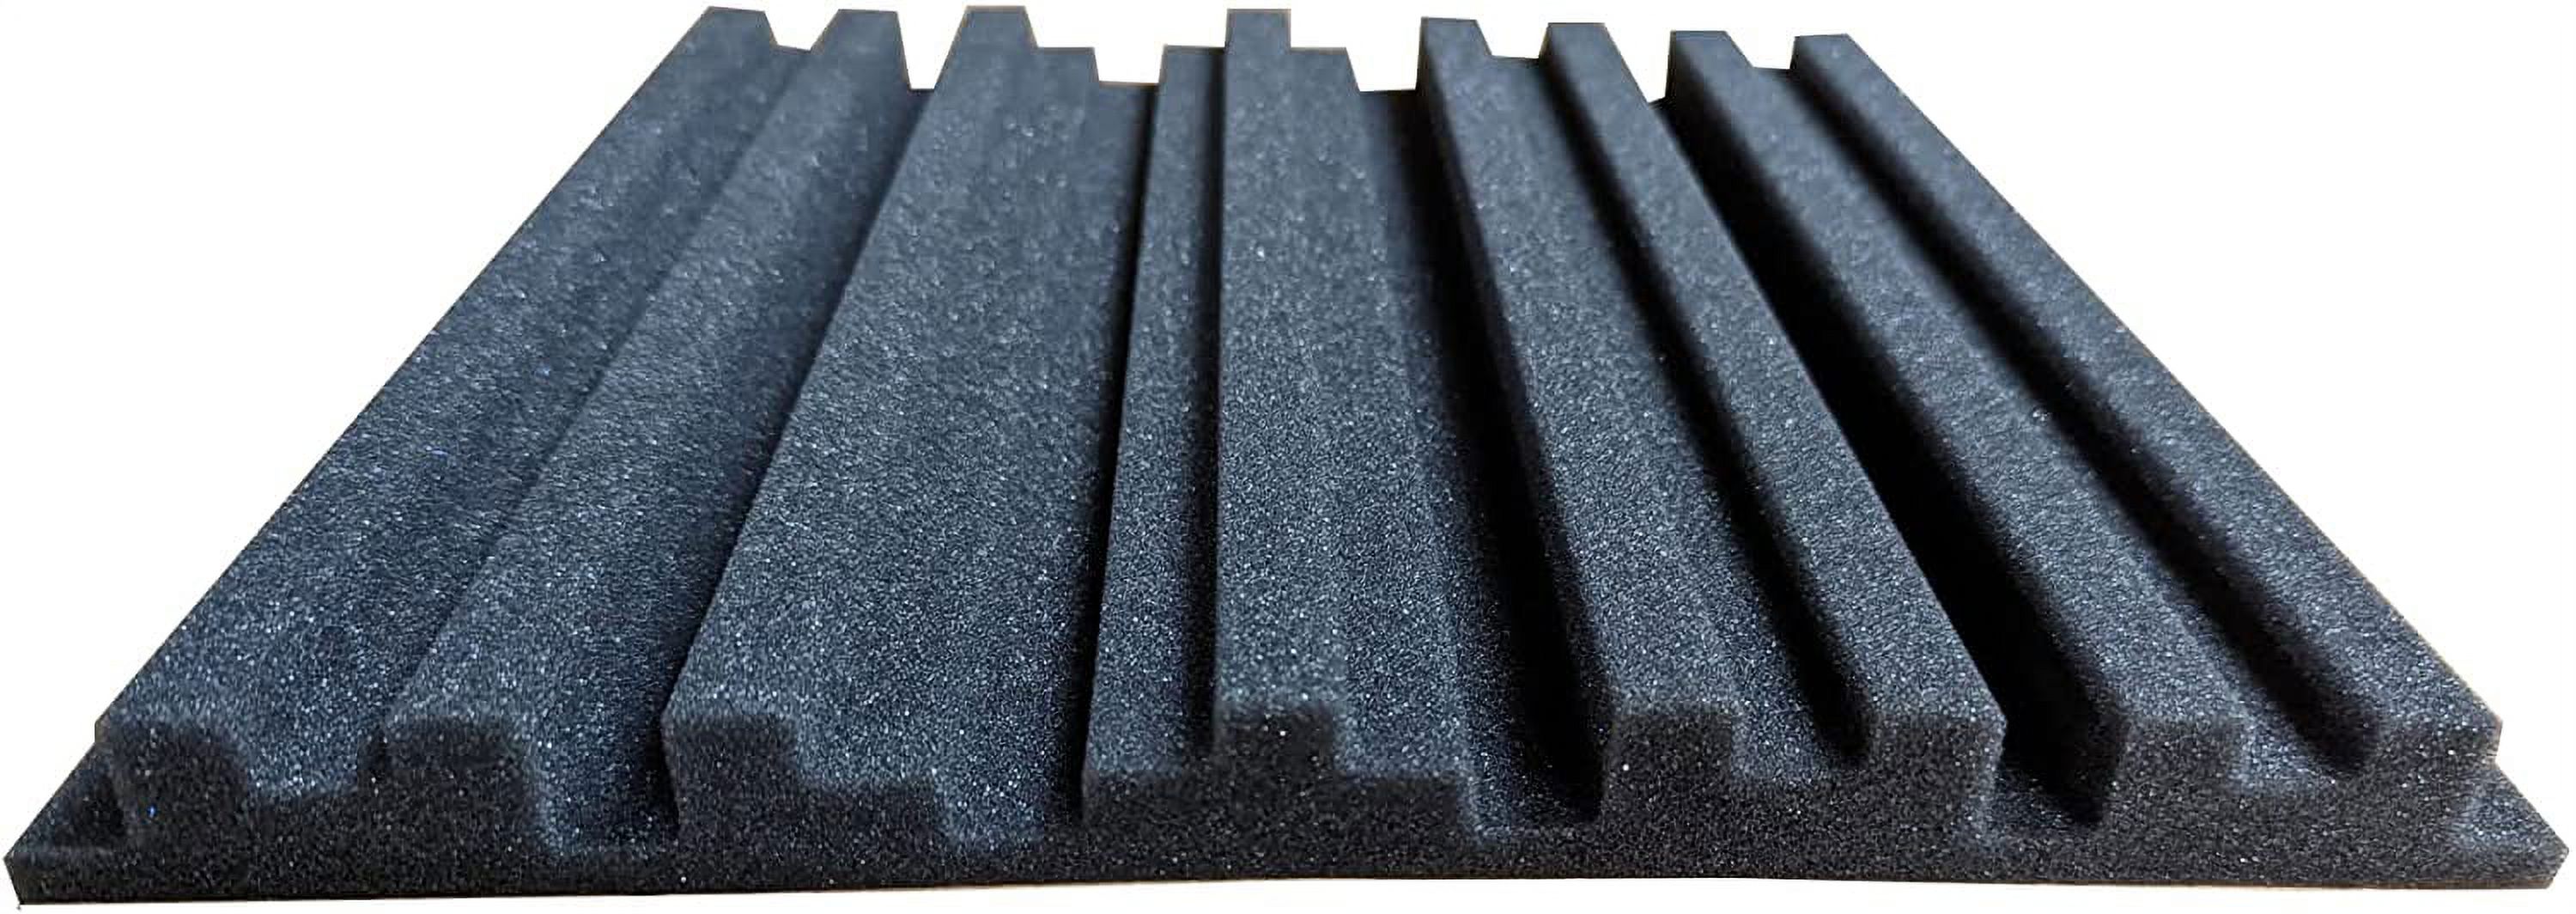 Siless Acoustic Insulation Absorbing Studio Wedge Foam Panels, 12x12x1 inches, 12 Pack - image 5 of 5